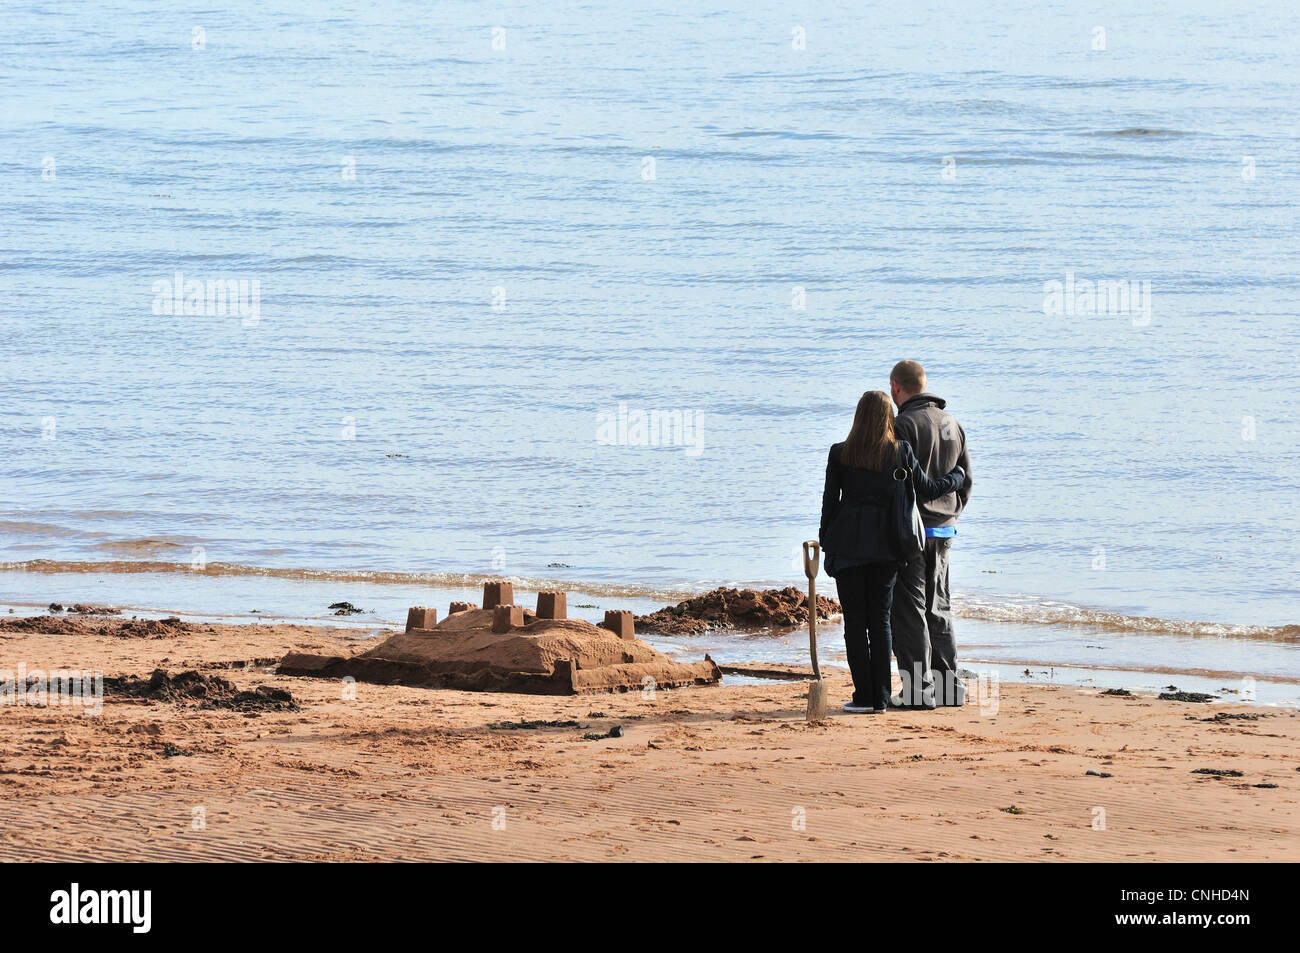 Concept. Young man and woman stand beside a sandcastle built on beach and contemplate the future together. Stock Photo